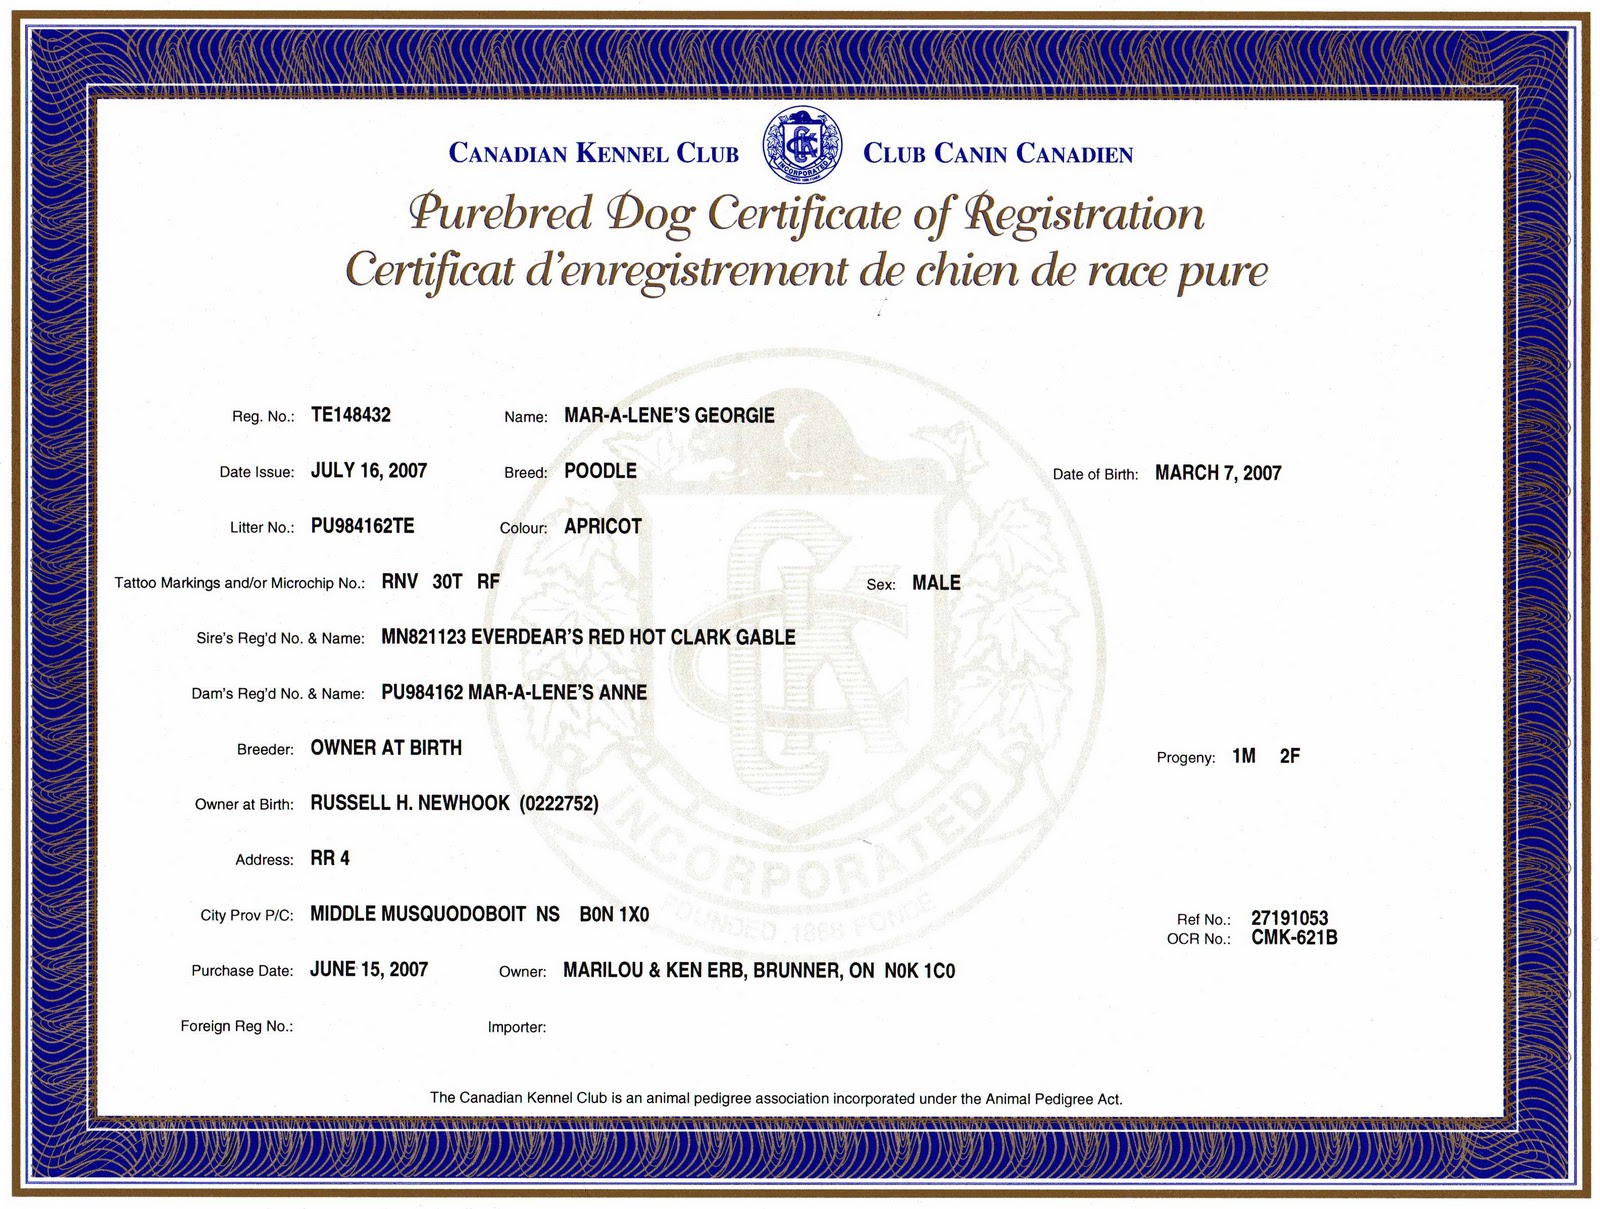 Good Dog Obedience Registered vs Purebred but not papered